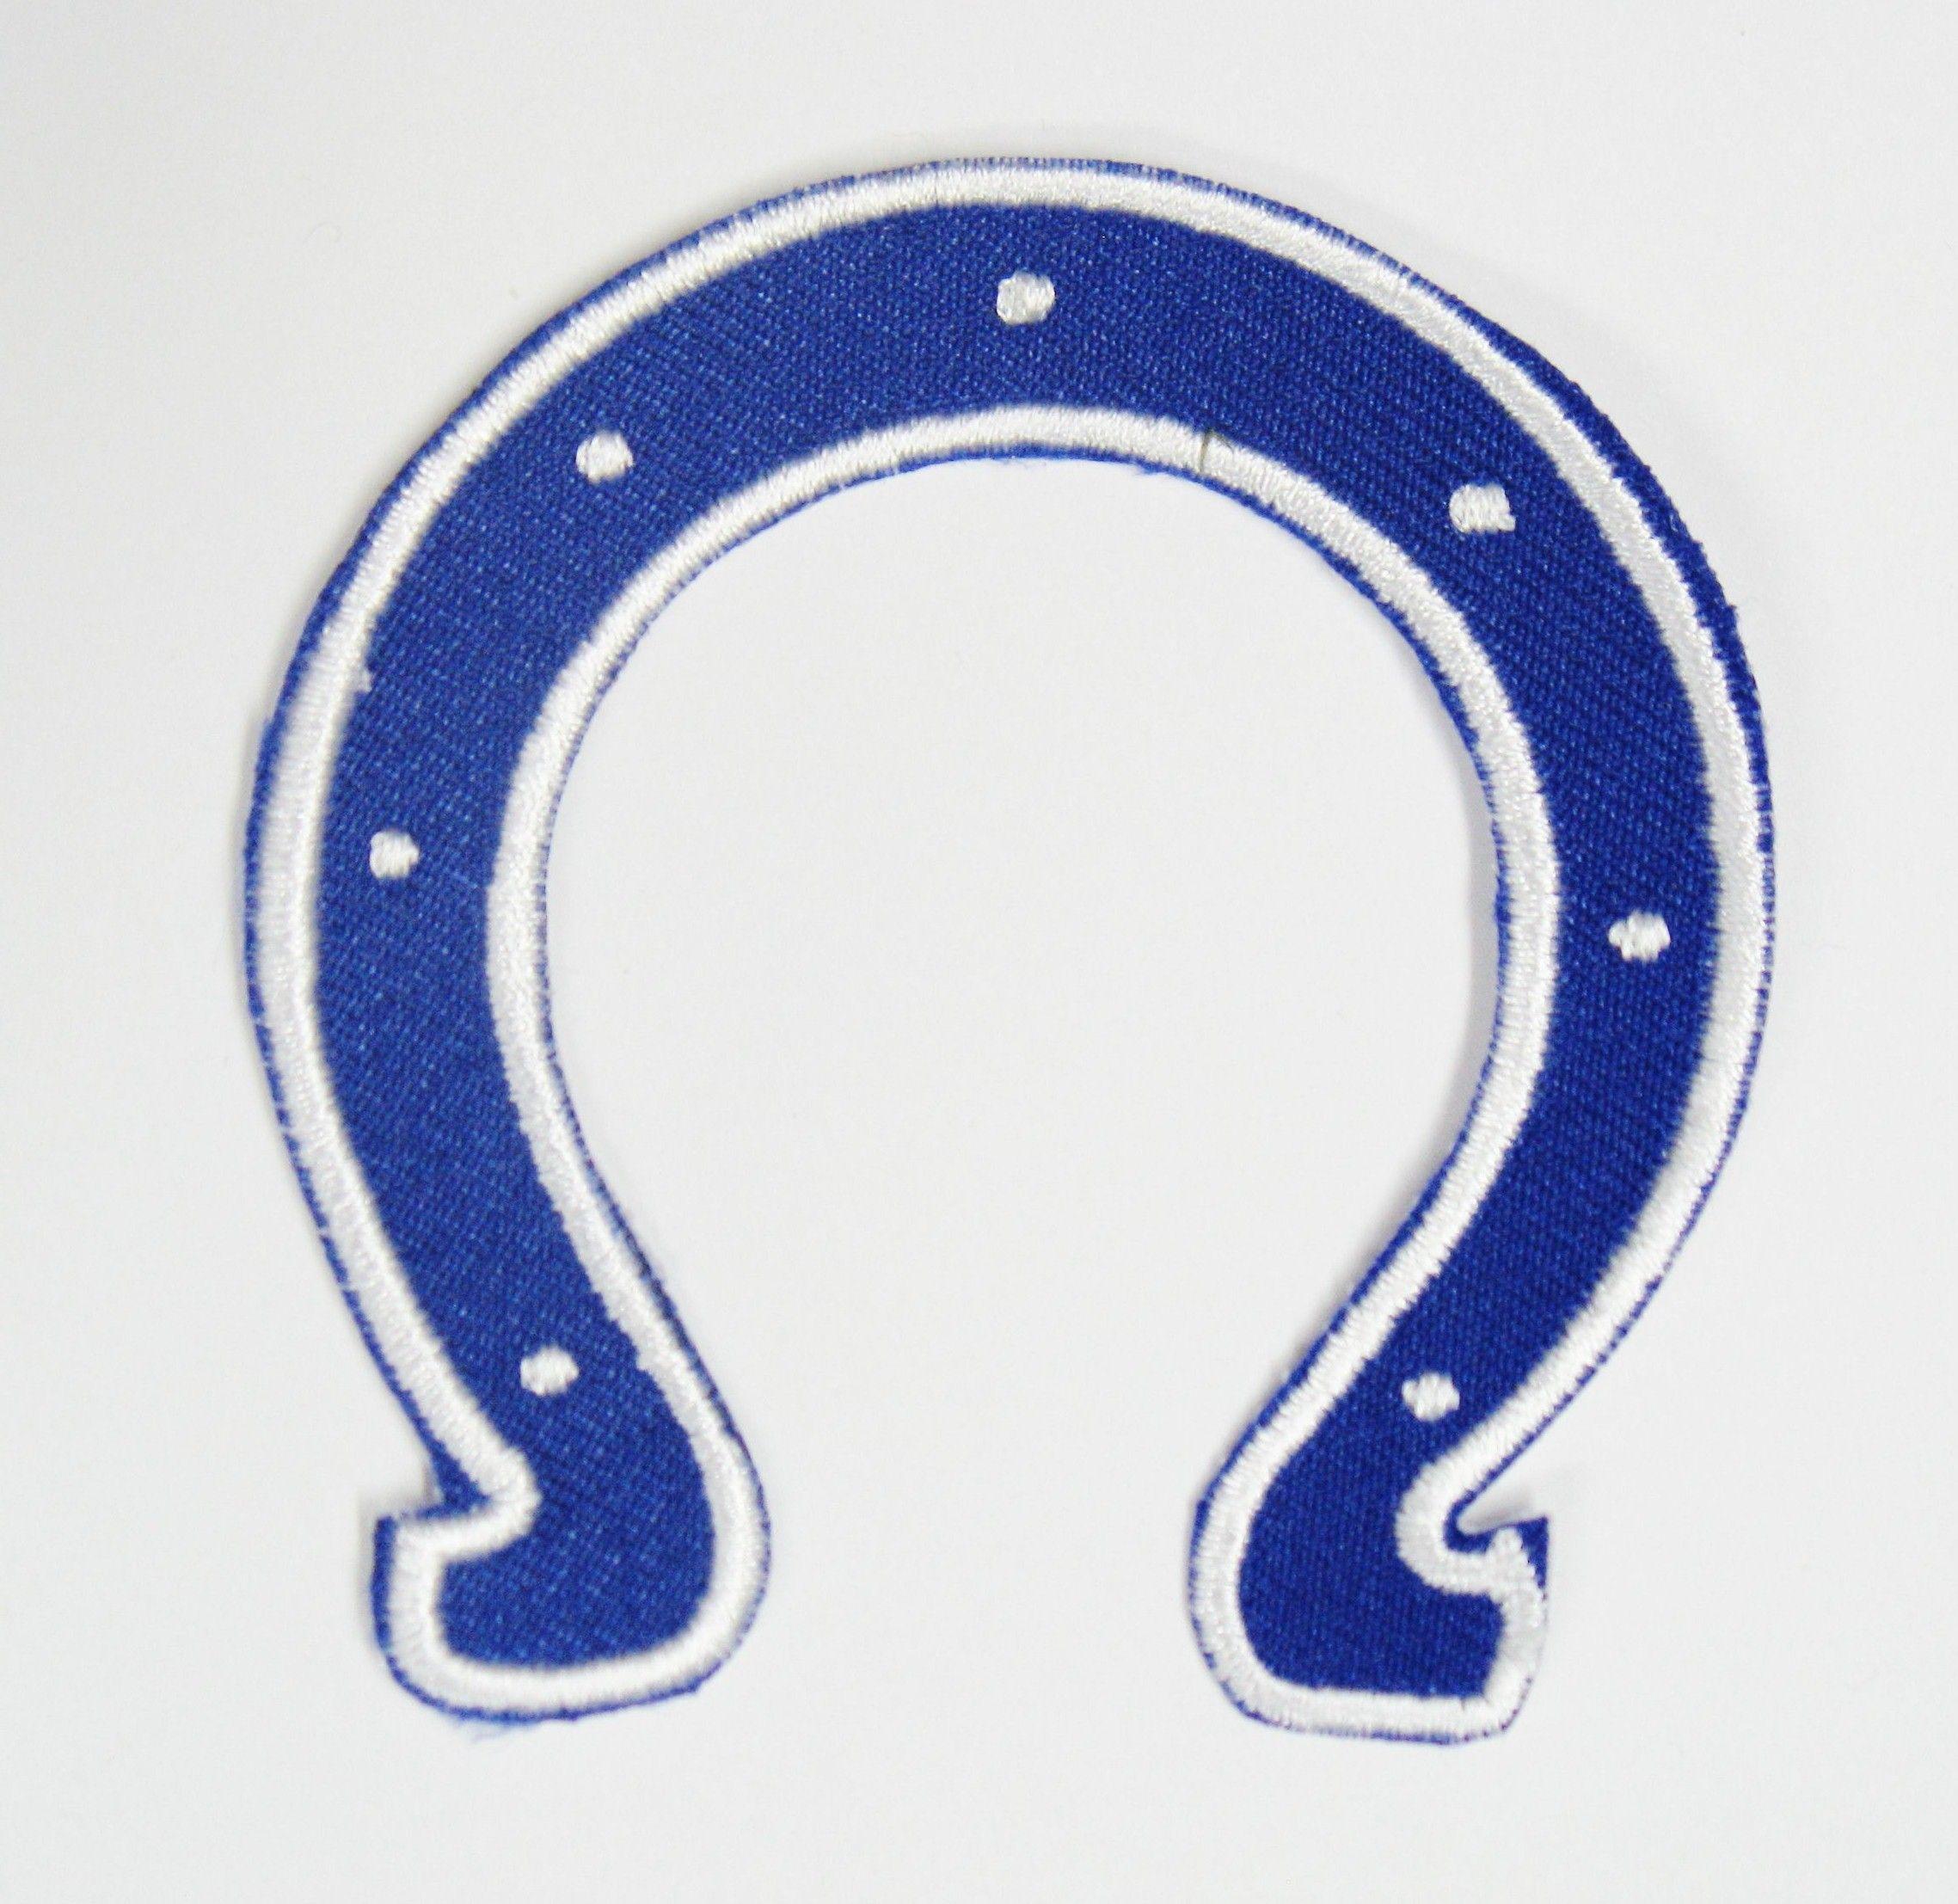 Upside Down Horse Shoe Logo - Josh McDaniels Withdraws from Colts' HC Job - Page 4 - The Stadium ...